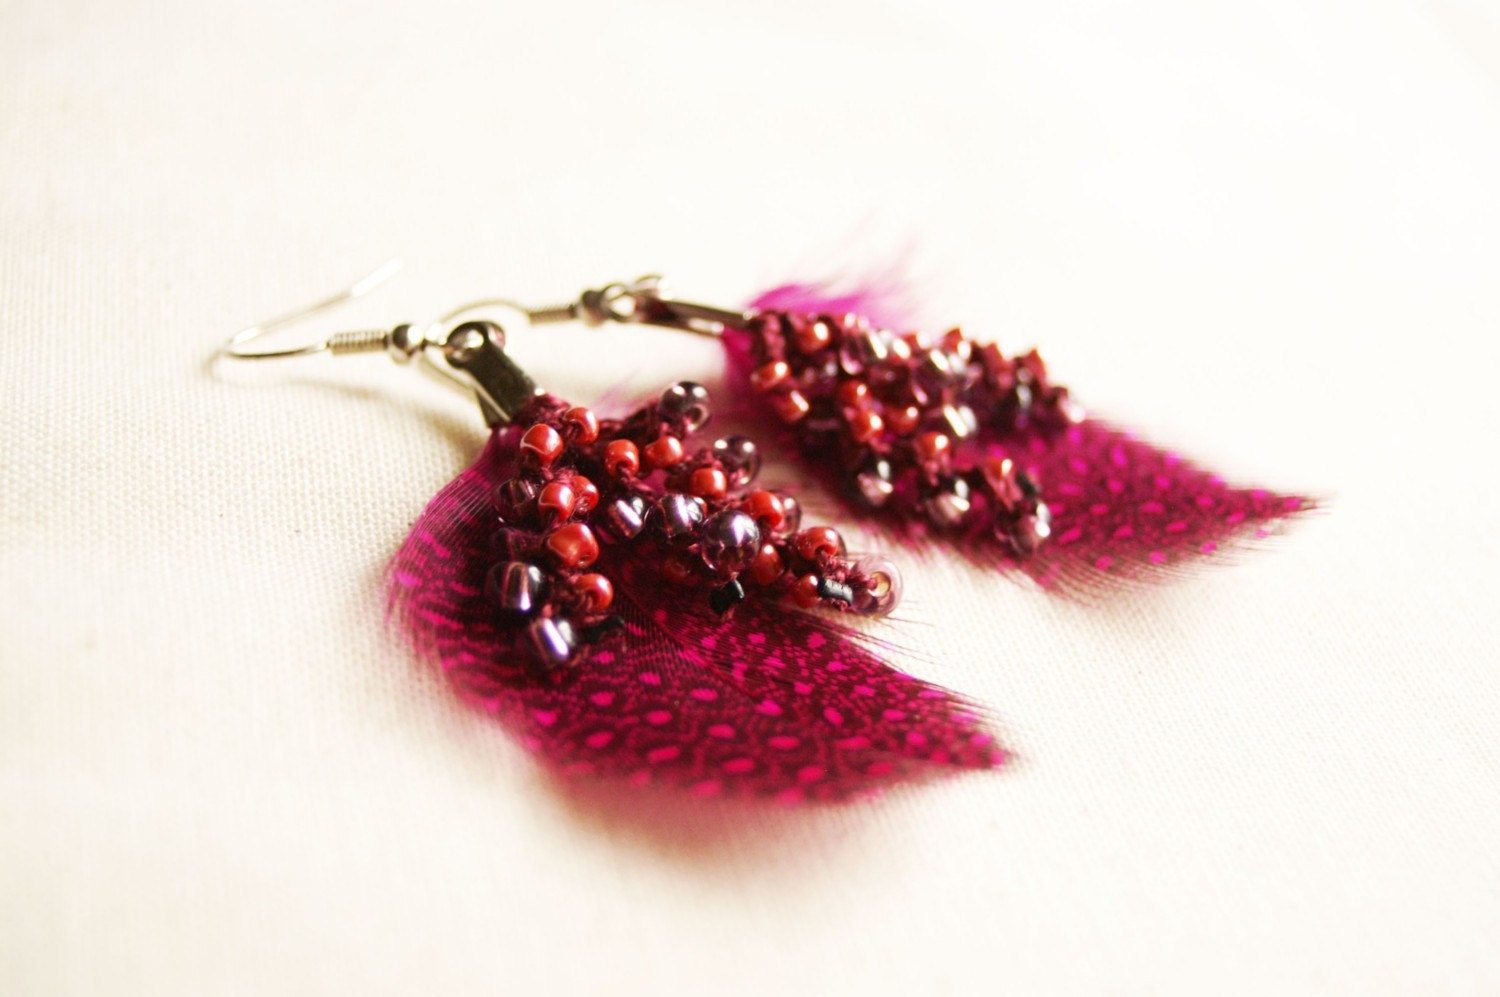 Feather earrings - Burgundy-purple  - crocheted earrings with feathers -  FREE SHIPPING